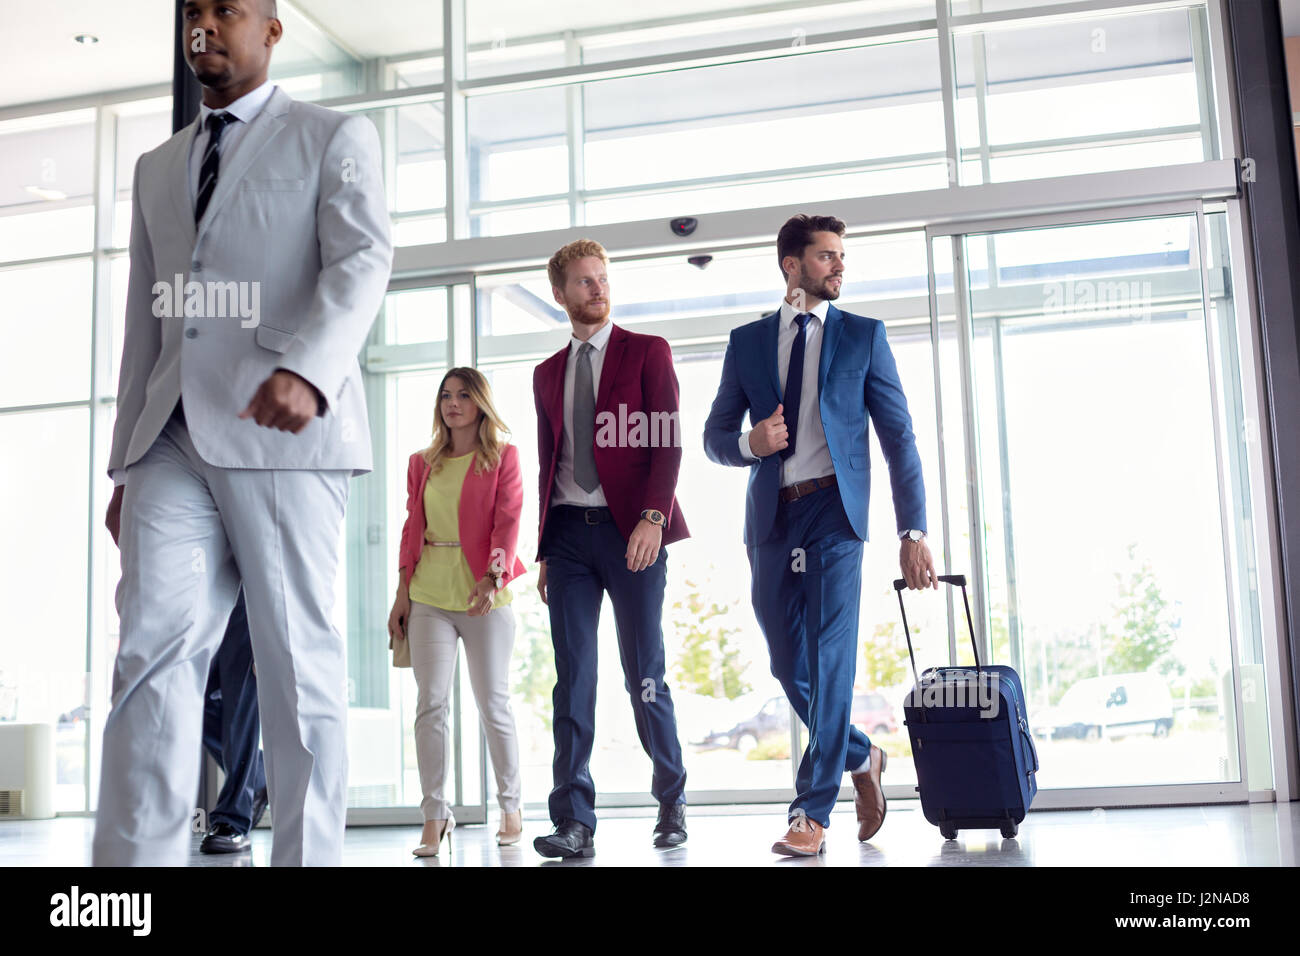 Business people walking in airport Banque D'Images